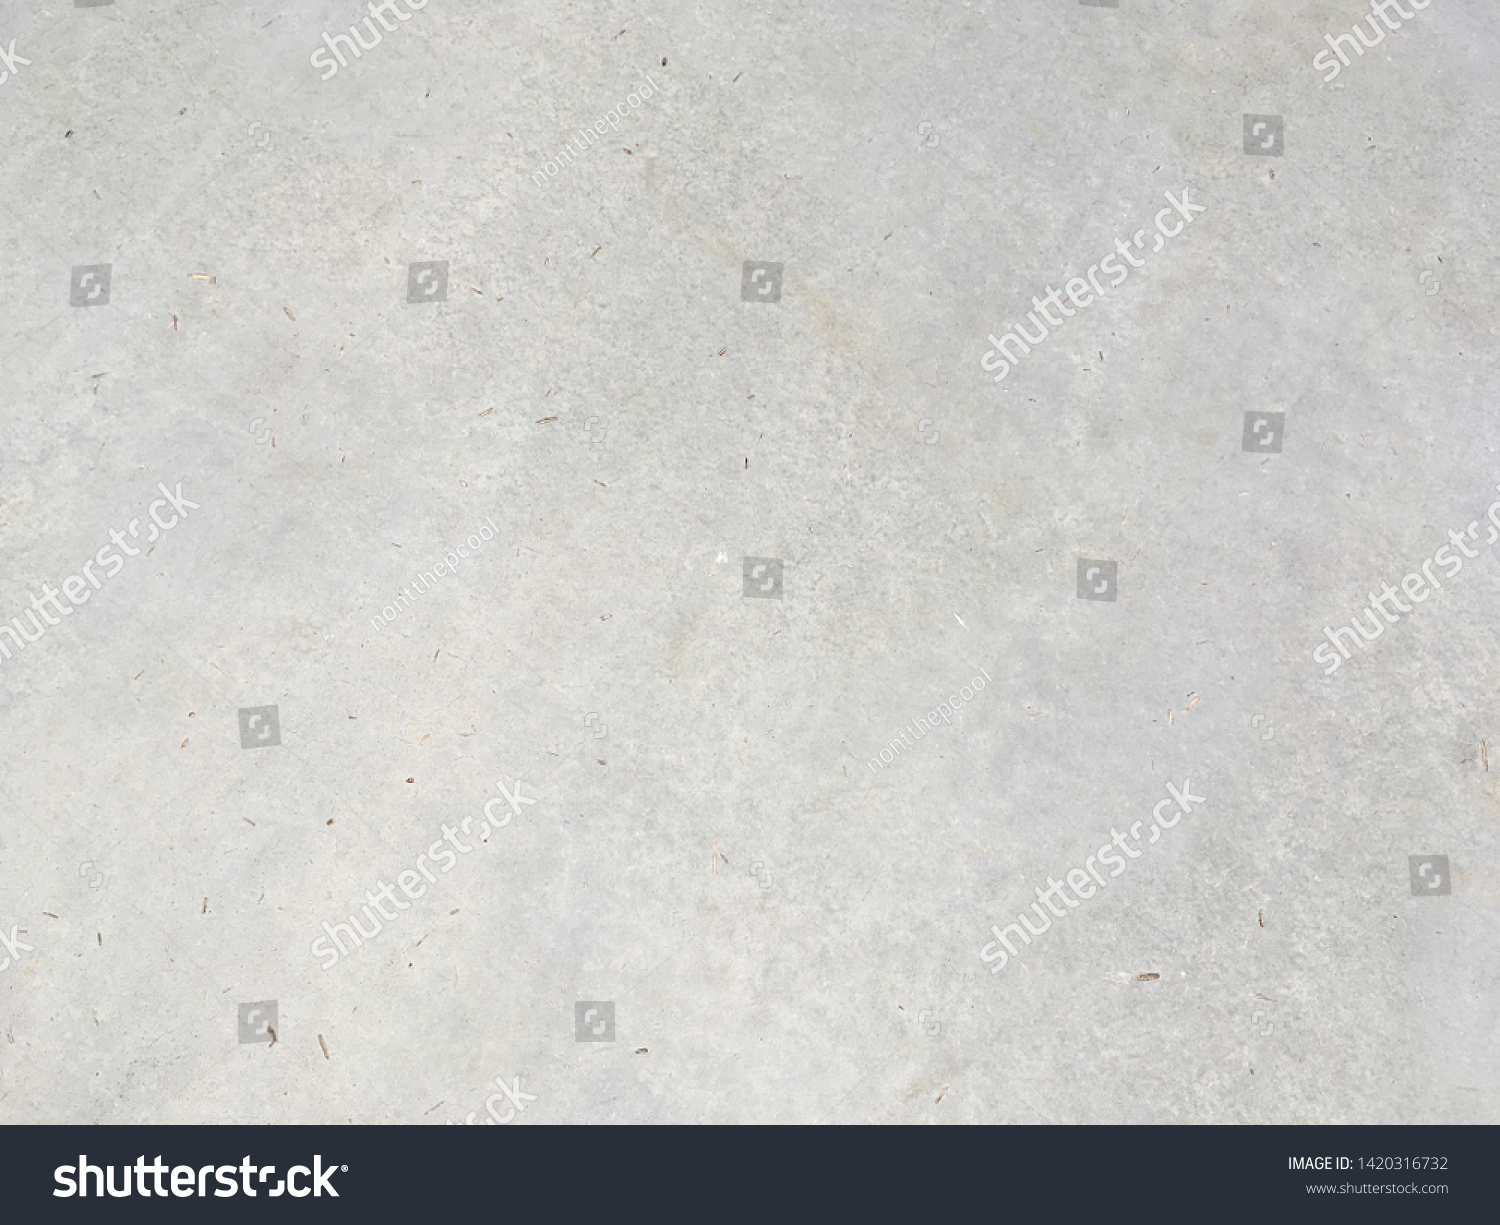 Background of concrete texture for backdrop #1420316732